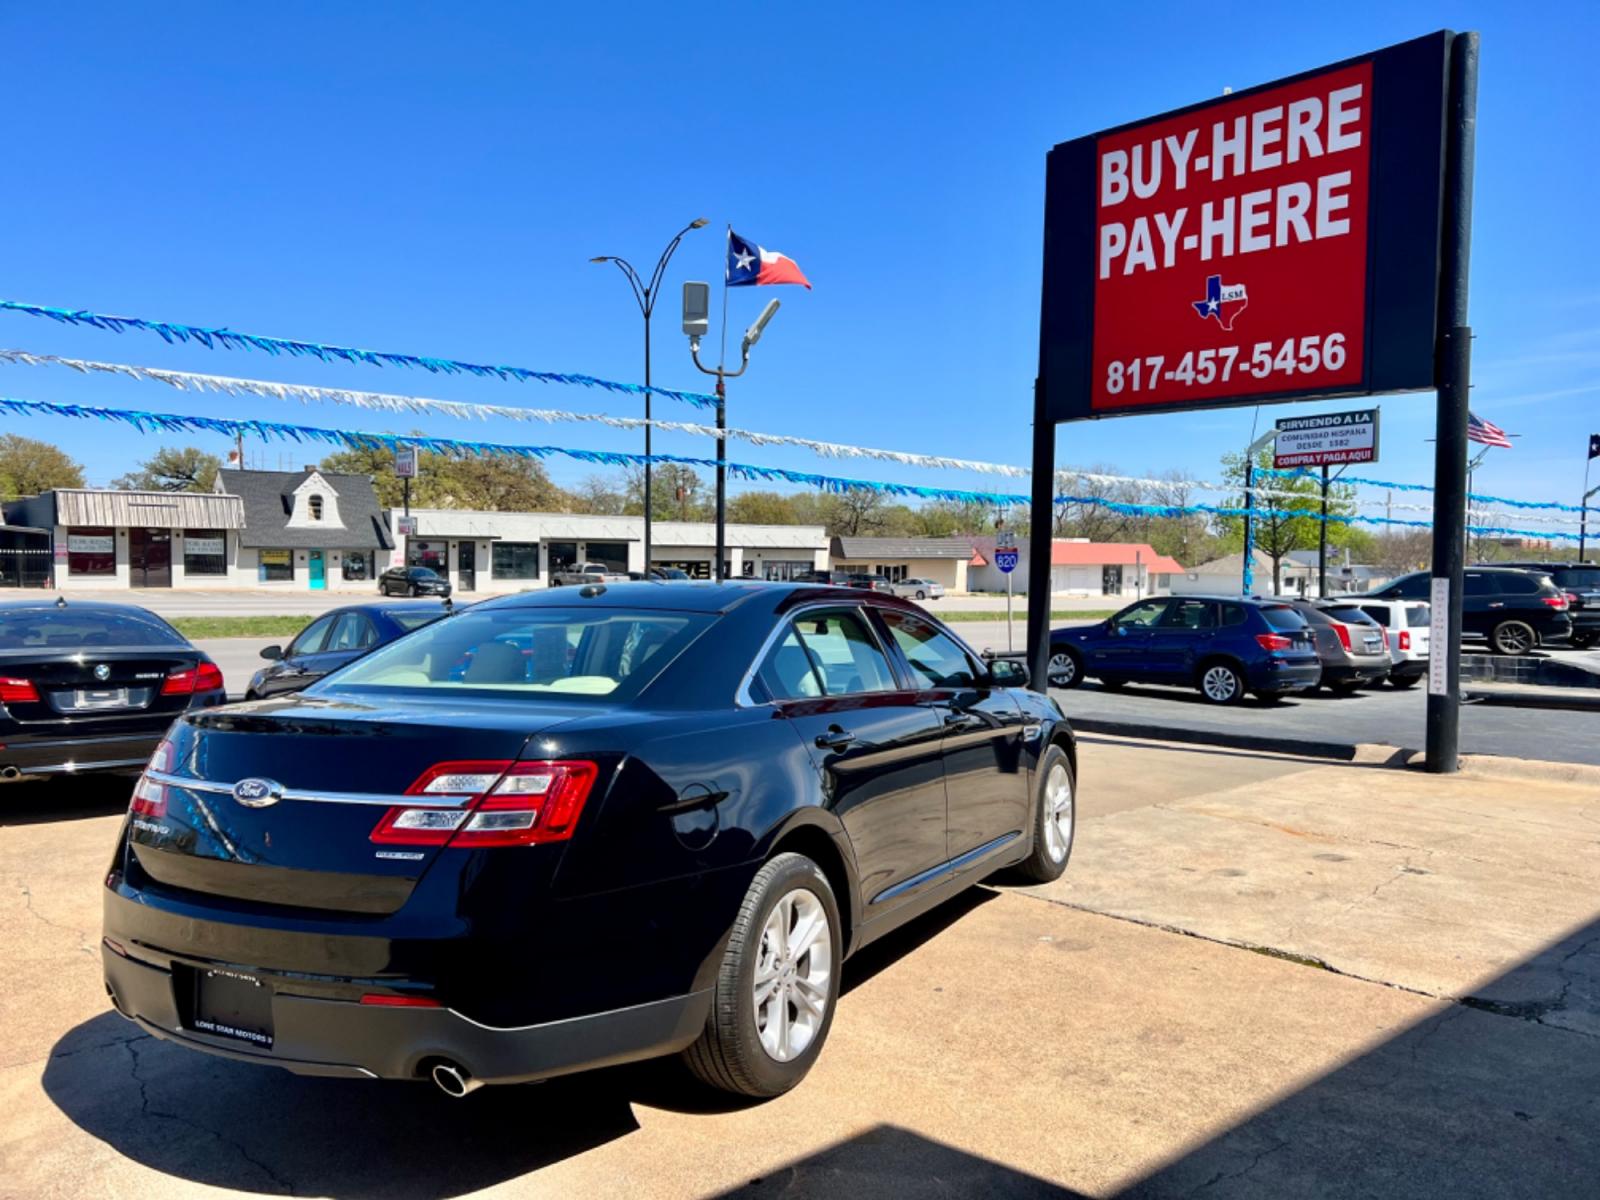 2017 BLACK FORD TAURUS (1FAHP2D81HG) , located at 5900 E. Lancaster Ave., Fort Worth, TX, 76112, (817) 457-5456, 0.000000, 0.000000 - This is a 2017 FORD TAURUS 4 DOOR SEDAN that is in excellent condition. There are no dents or scratches. The interior is clean with no rips or tears or stains. All power windows, door locks and seats. Ice cold AC for those hot Texas summer days. It is equipped with a CD player, AM/FM radio, AUX port - Photo #6